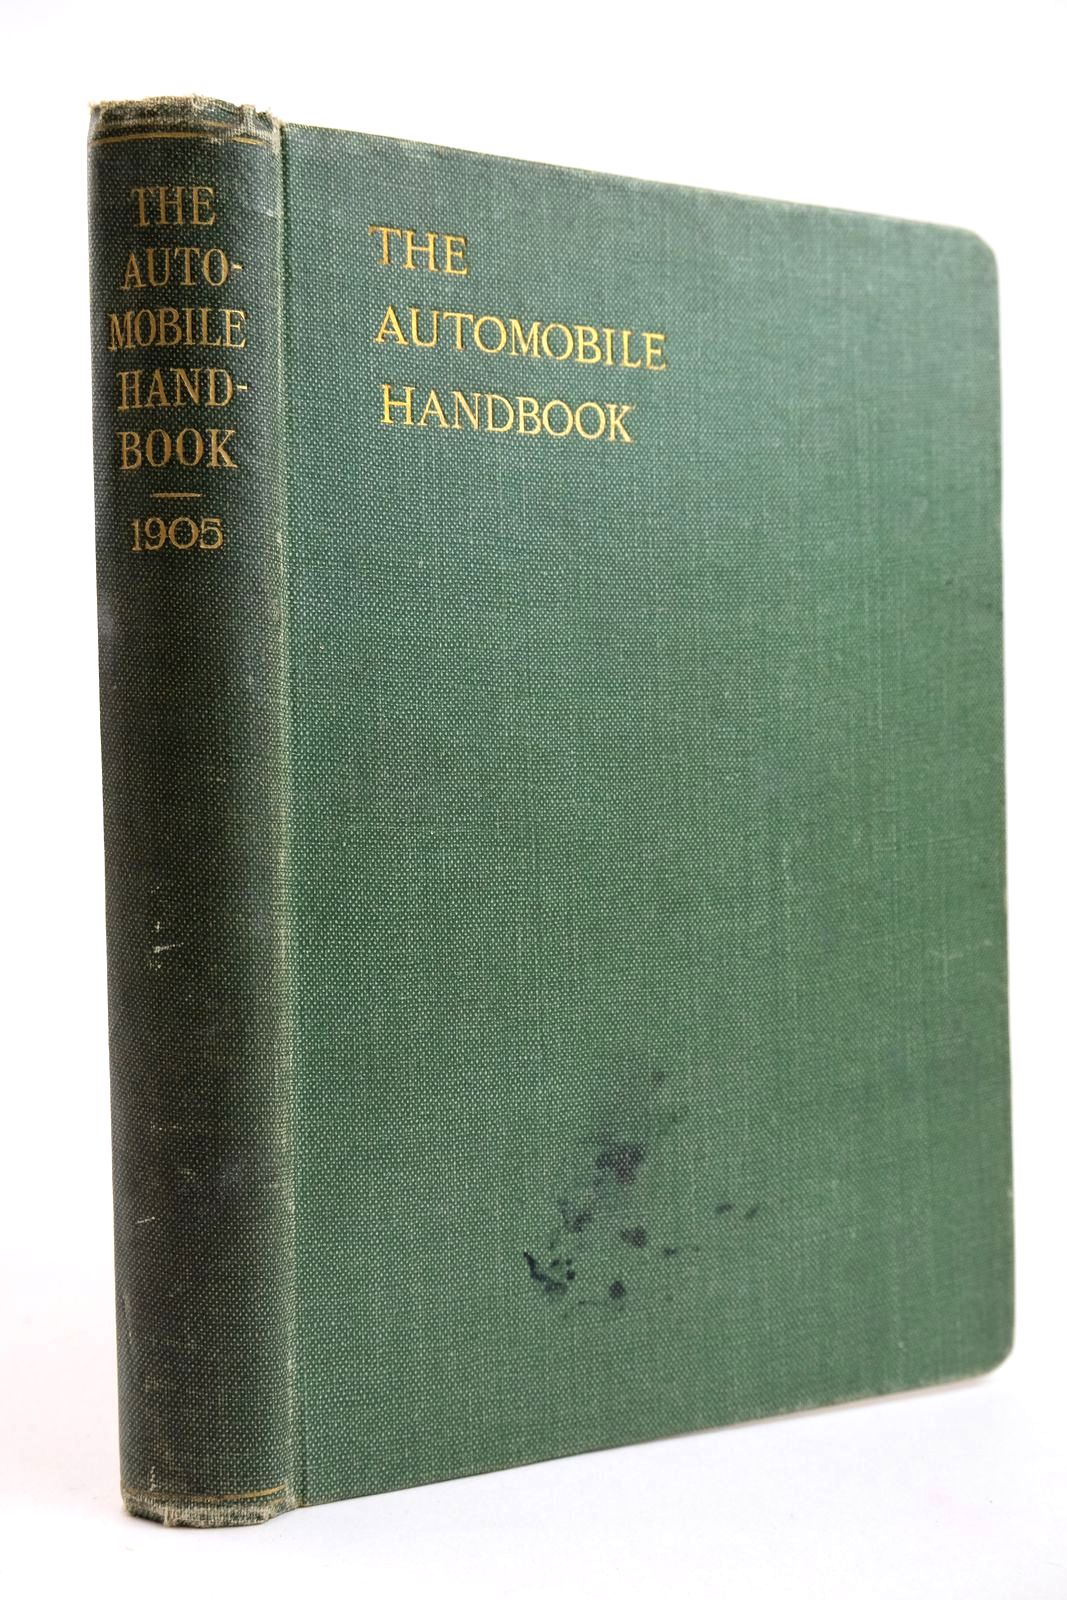 Photo of THE AUTOMOBILE HANDBOOK- Stock Number: 2133872